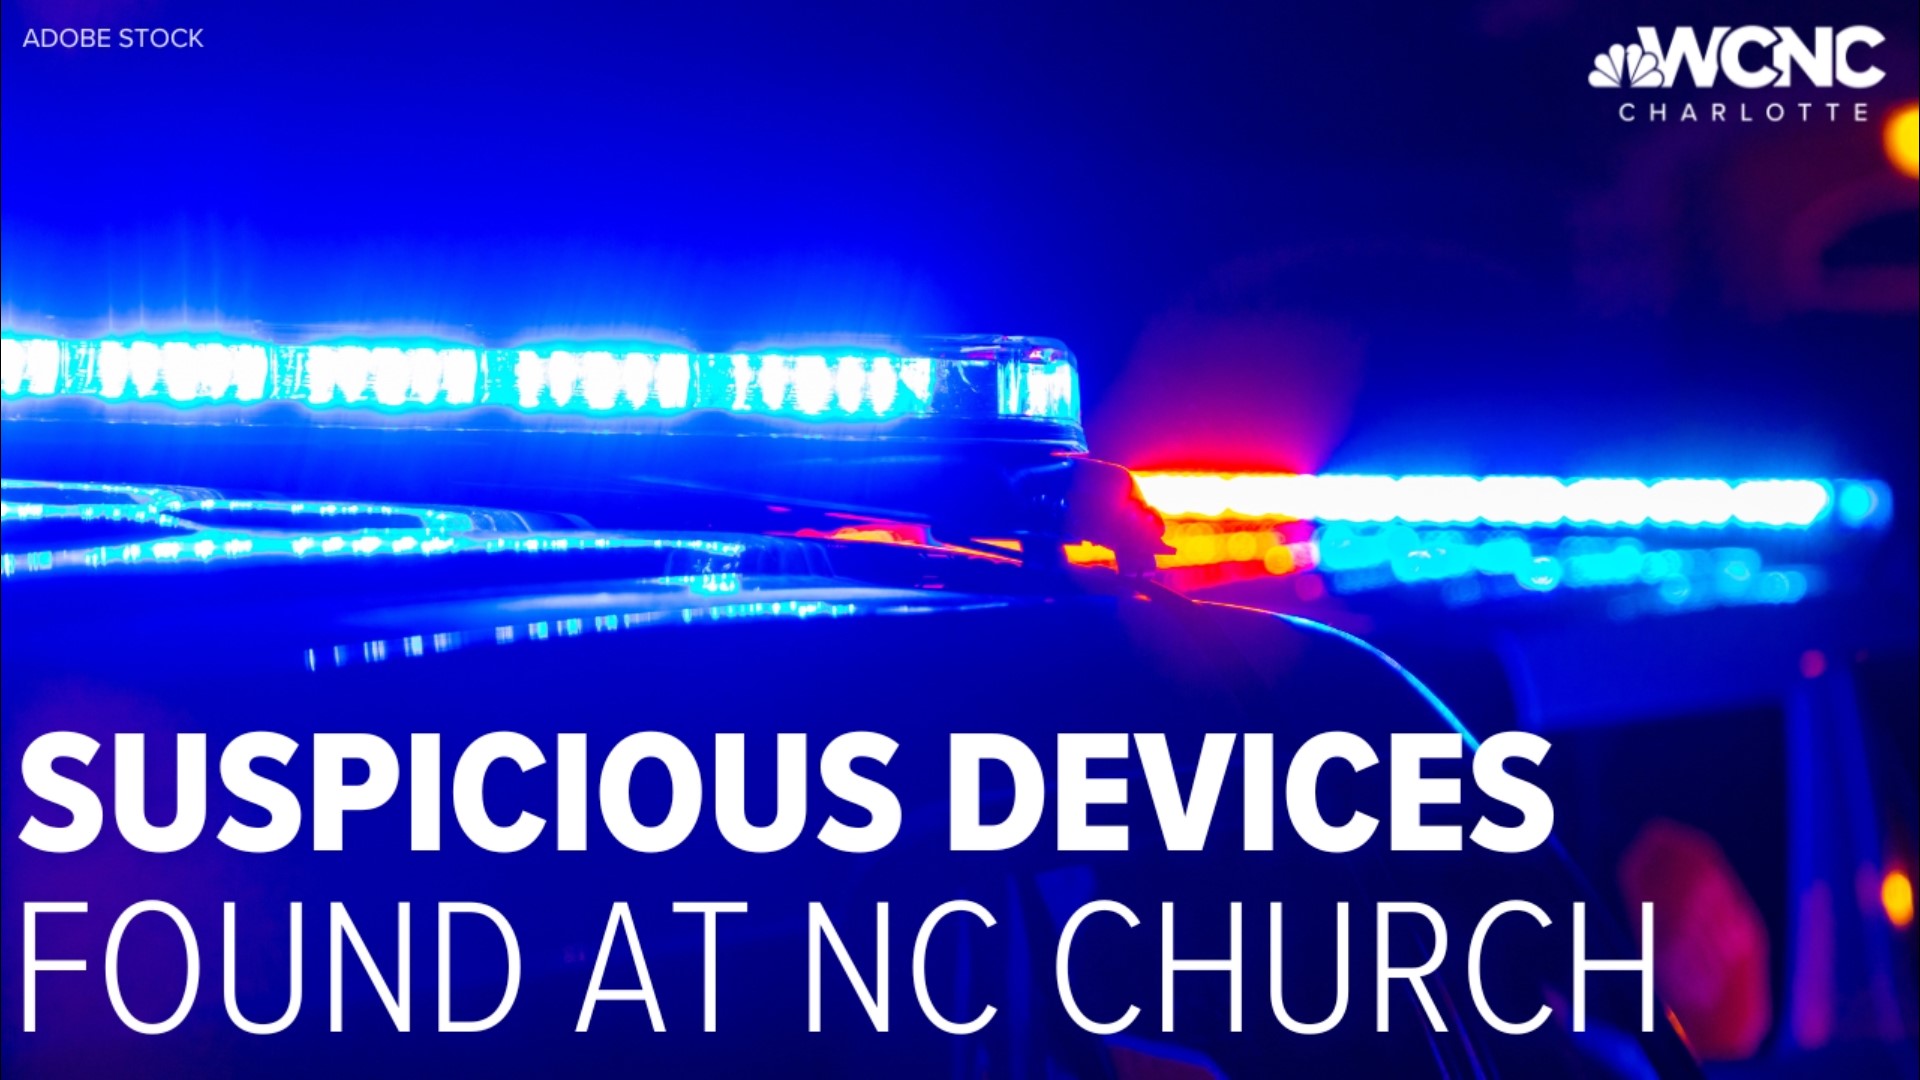 Hickory Police are investigating after two suspicious devices were found at Market Place Church.